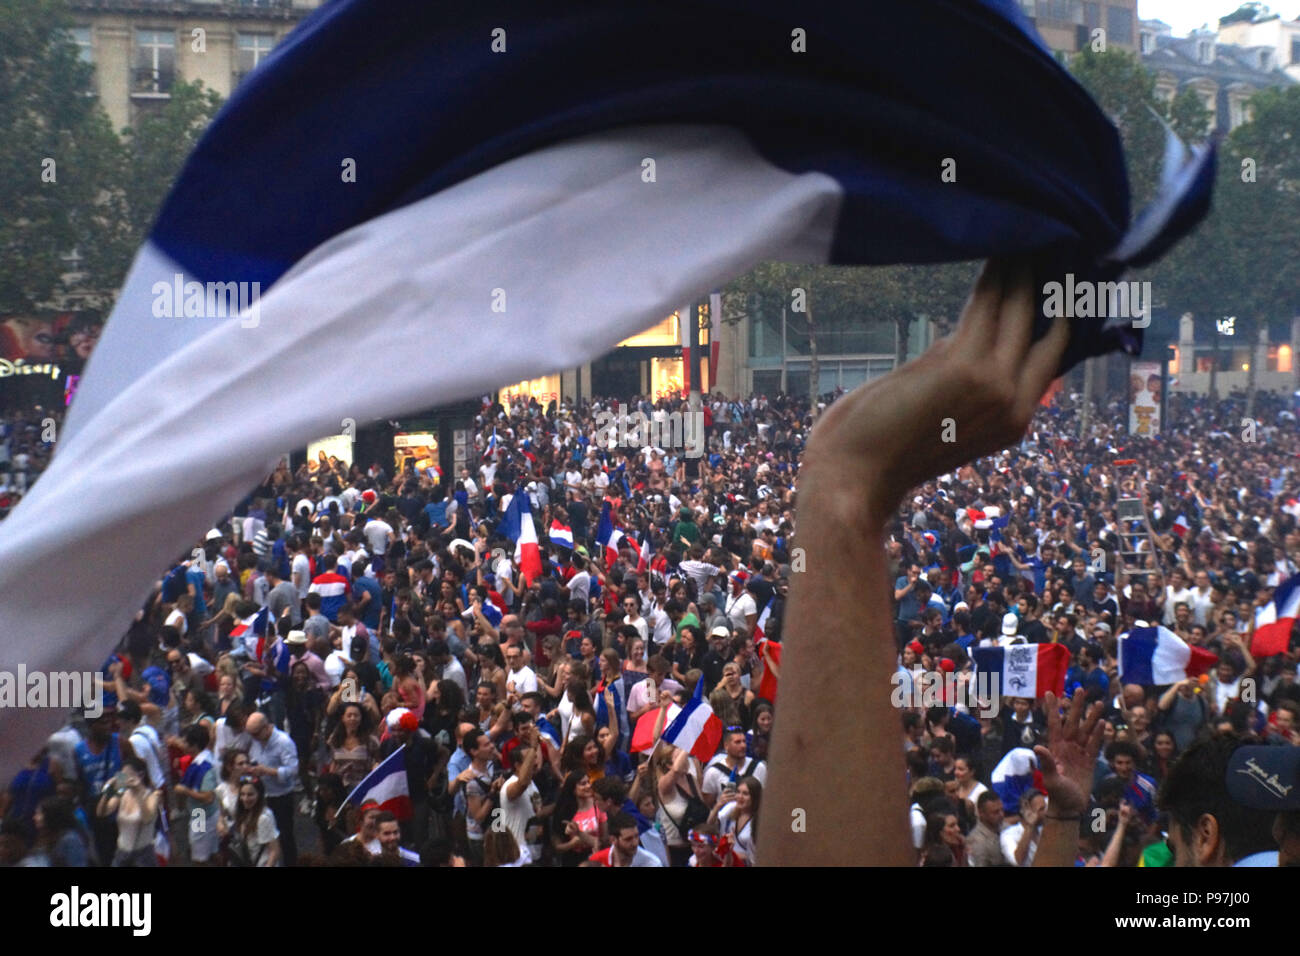 Paris, France. 15 July 2018. Football fans celebrate World Cup victory. Roland Phillips/Alamy Live News Stock Photo